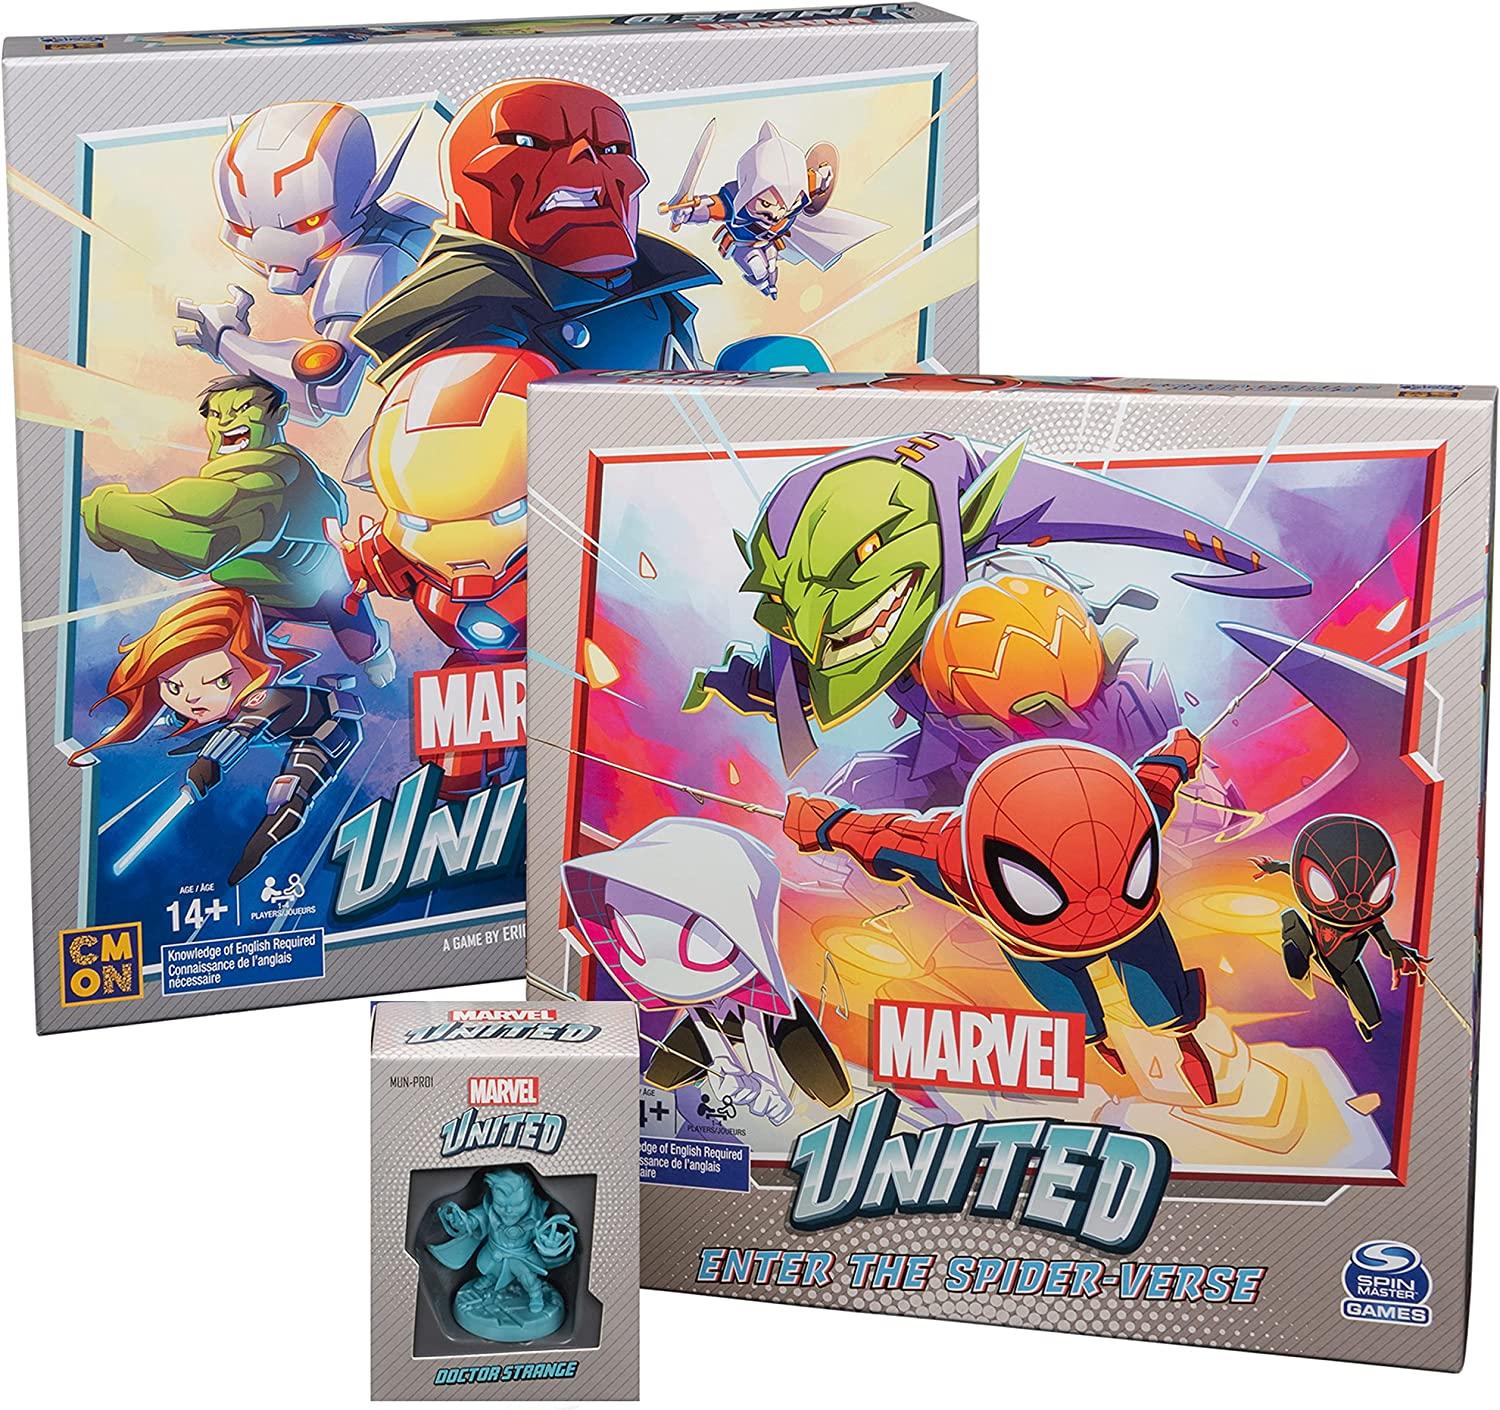 Marvel United Superhero Strategy Board Game Bundle with Spiderman for $19.60